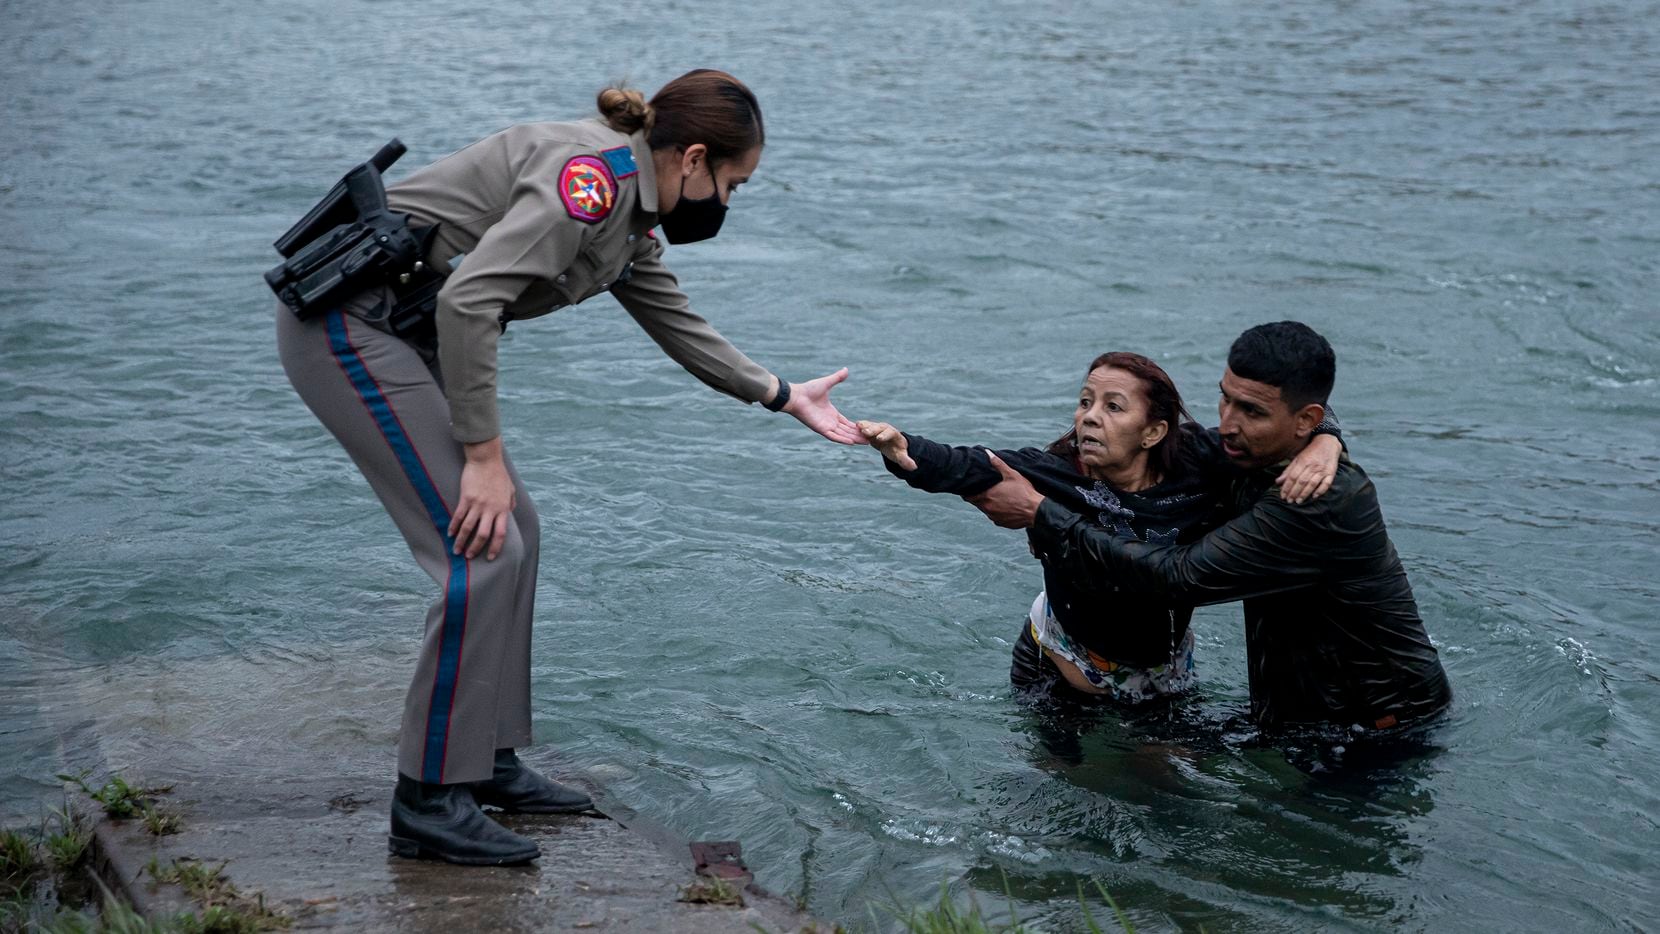 A Texas Department of Public safety trooper helps Belkis Salas of Venezuela out of the Rio Grande near Del Rio on Friday, April 30, 2021. Salas struggled to cross the river, falling halfway through and being pulled up by her son-in-law and a smuggler. Many Venezuelans are being welcomed for asylum processing on one part of the border while Central Americans are being quickly expelled on other parts of the border.